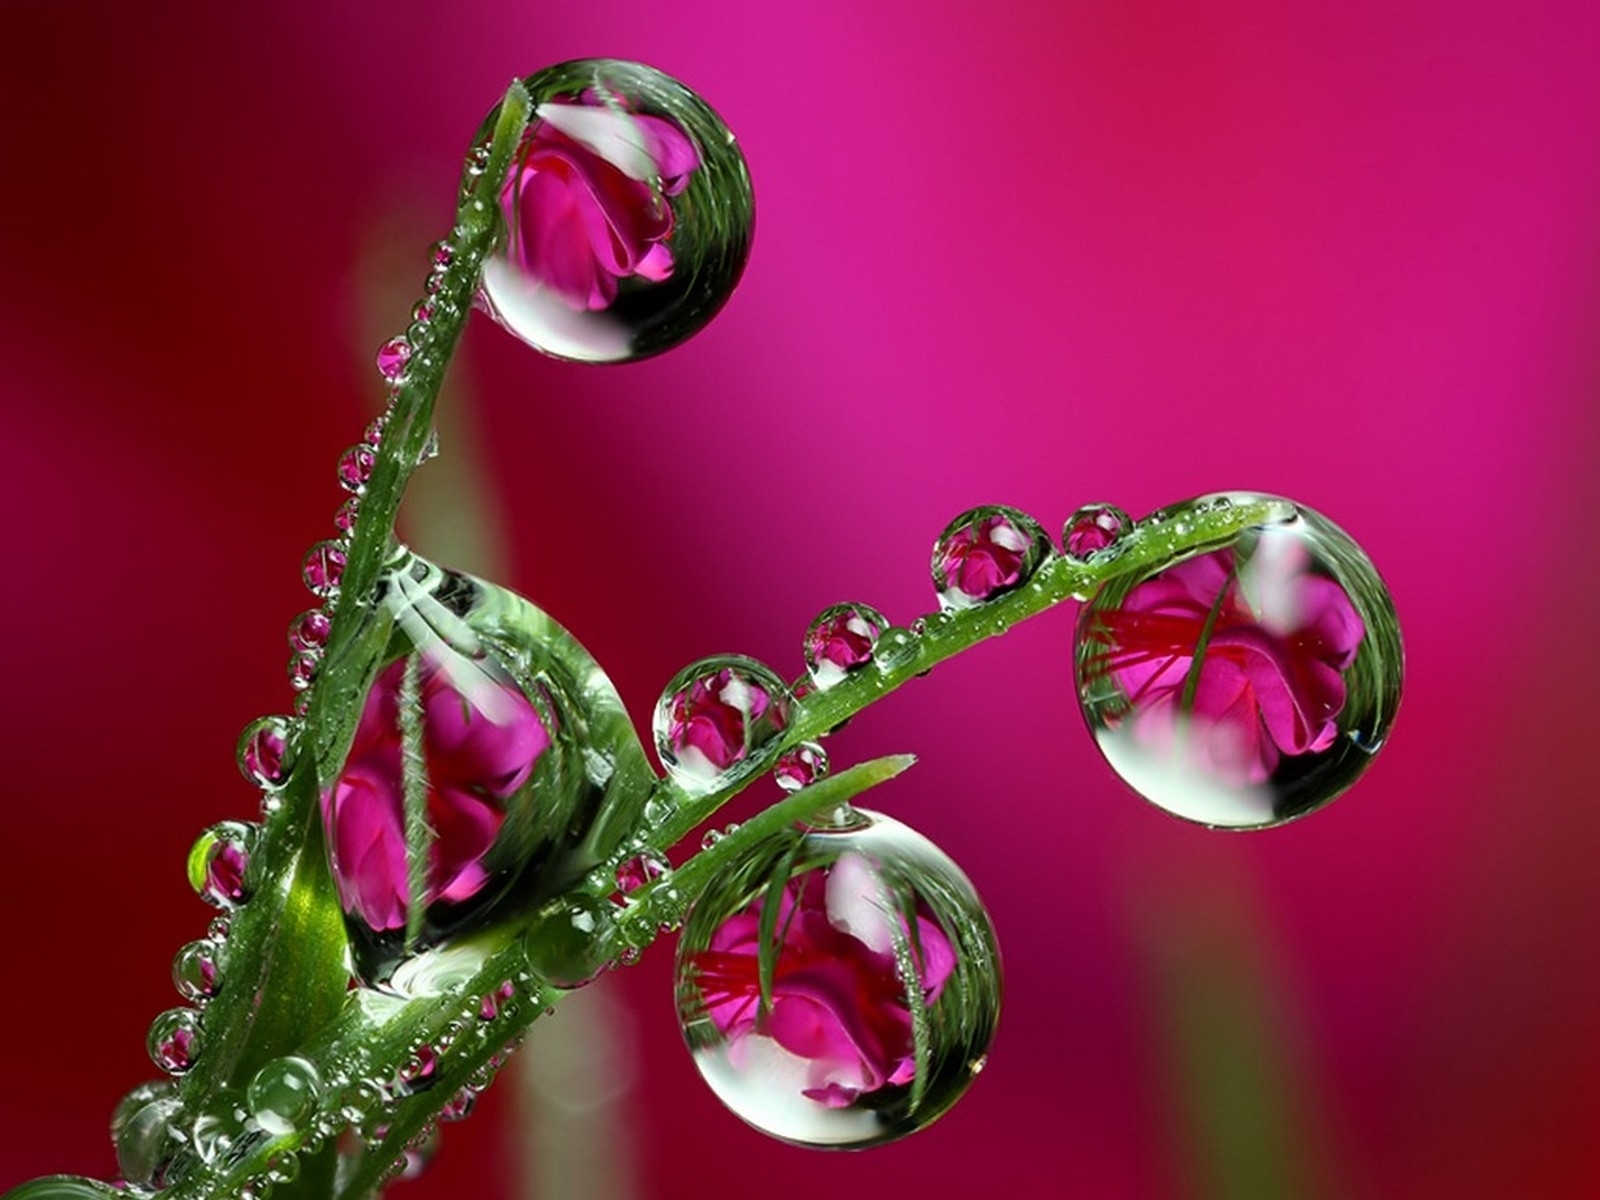 Popular Drops Image for Phone